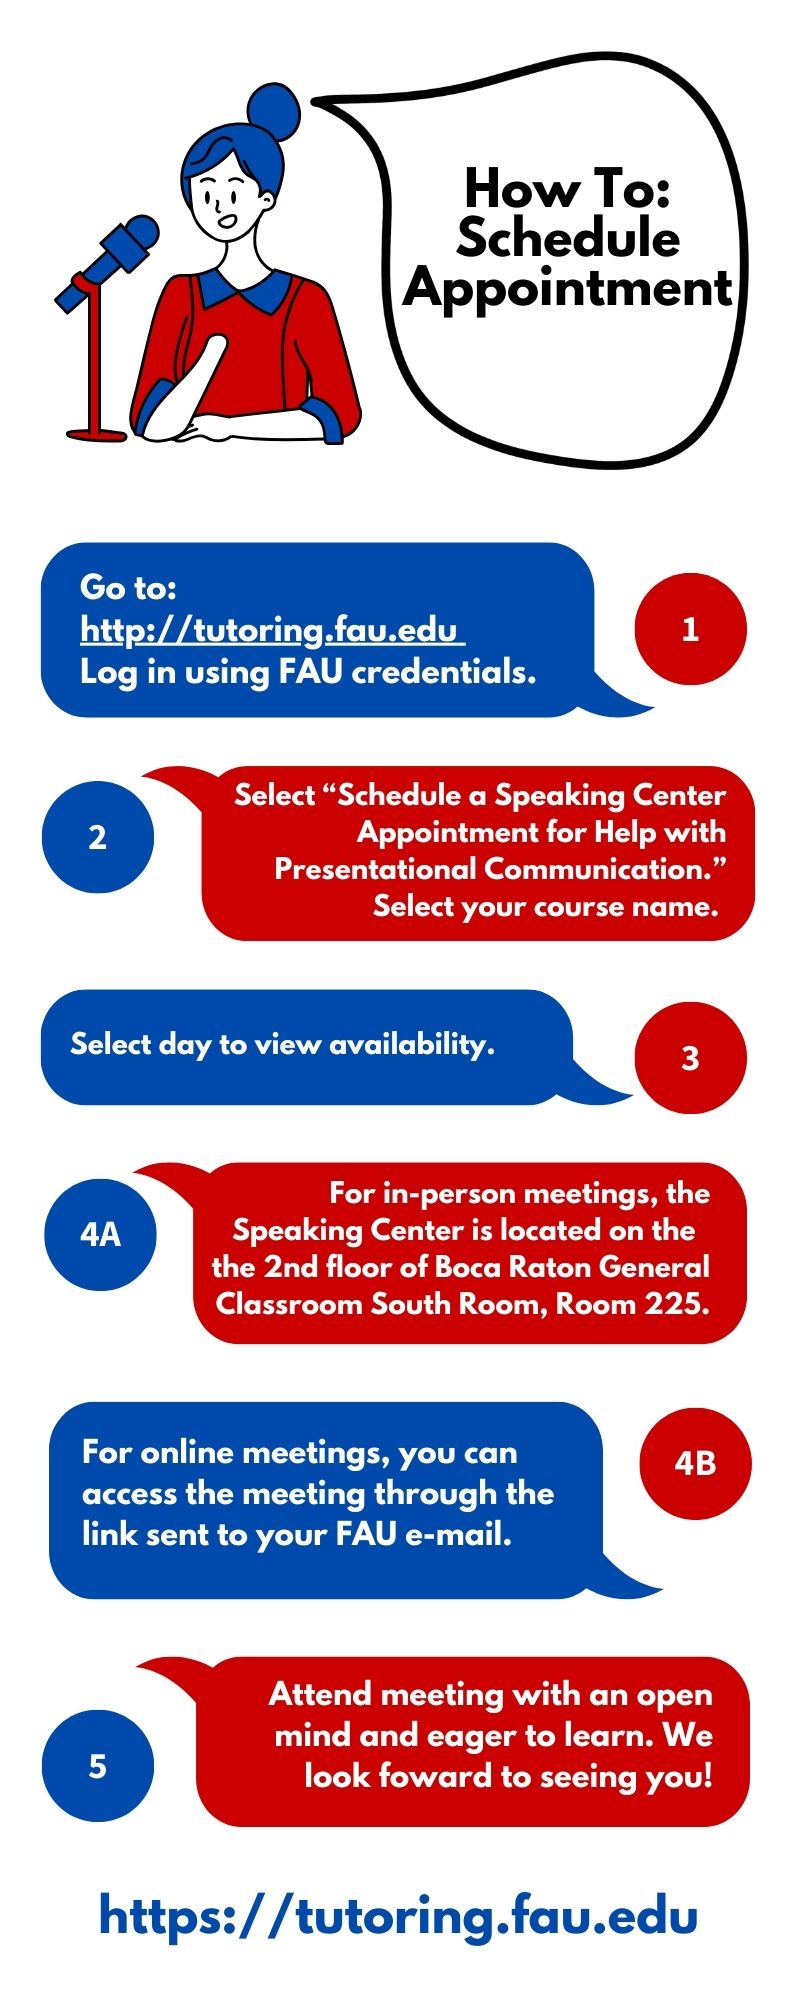 Scheduling Appointment Infographic